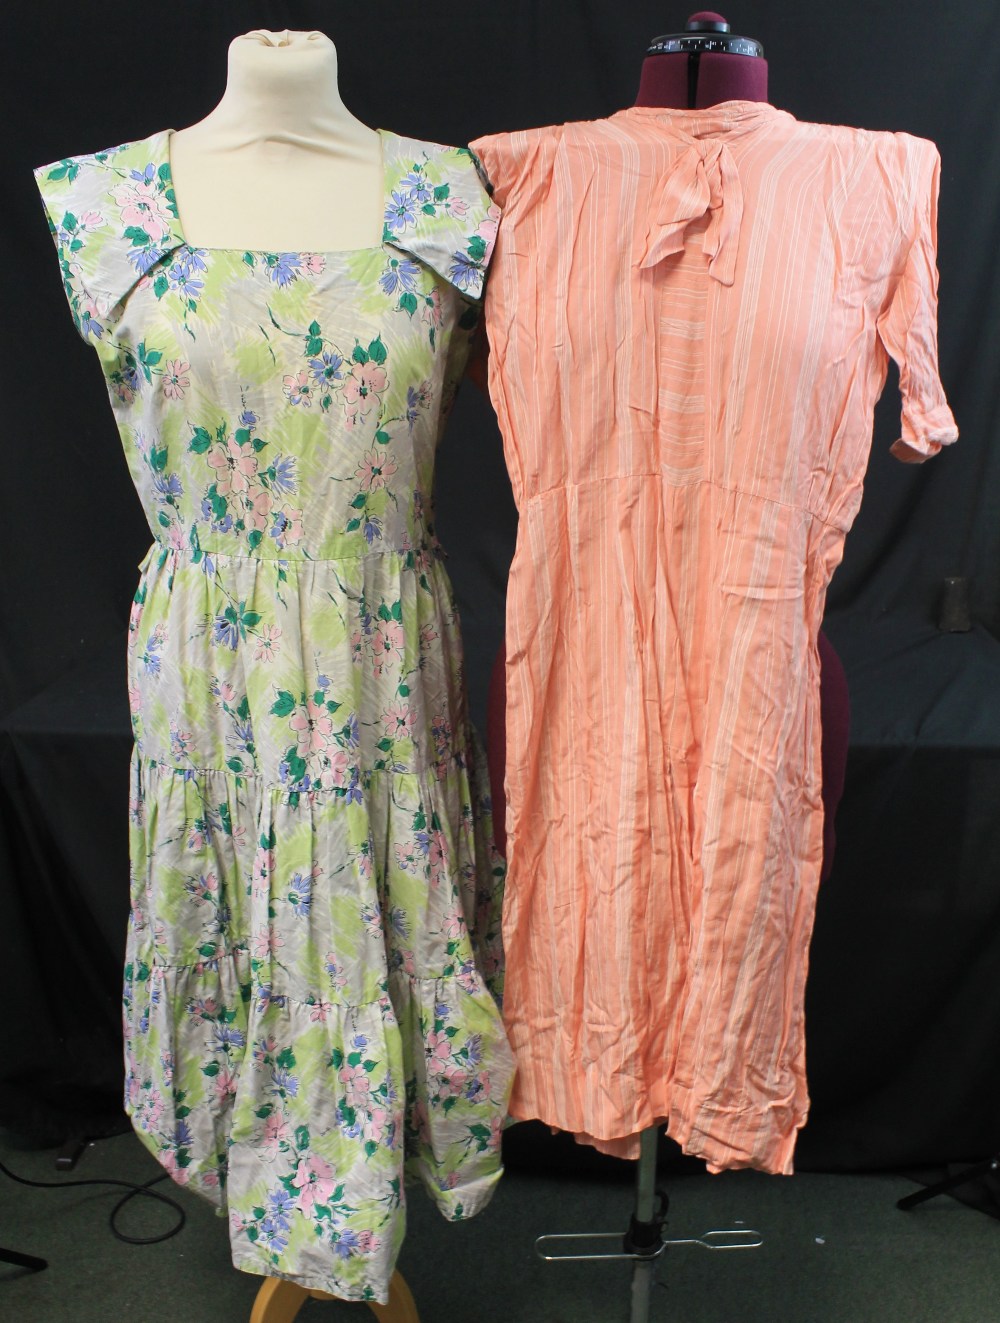 Collection of vintage dresses (40's-60's), to include: dark brown check empire line dress, - Image 3 of 5